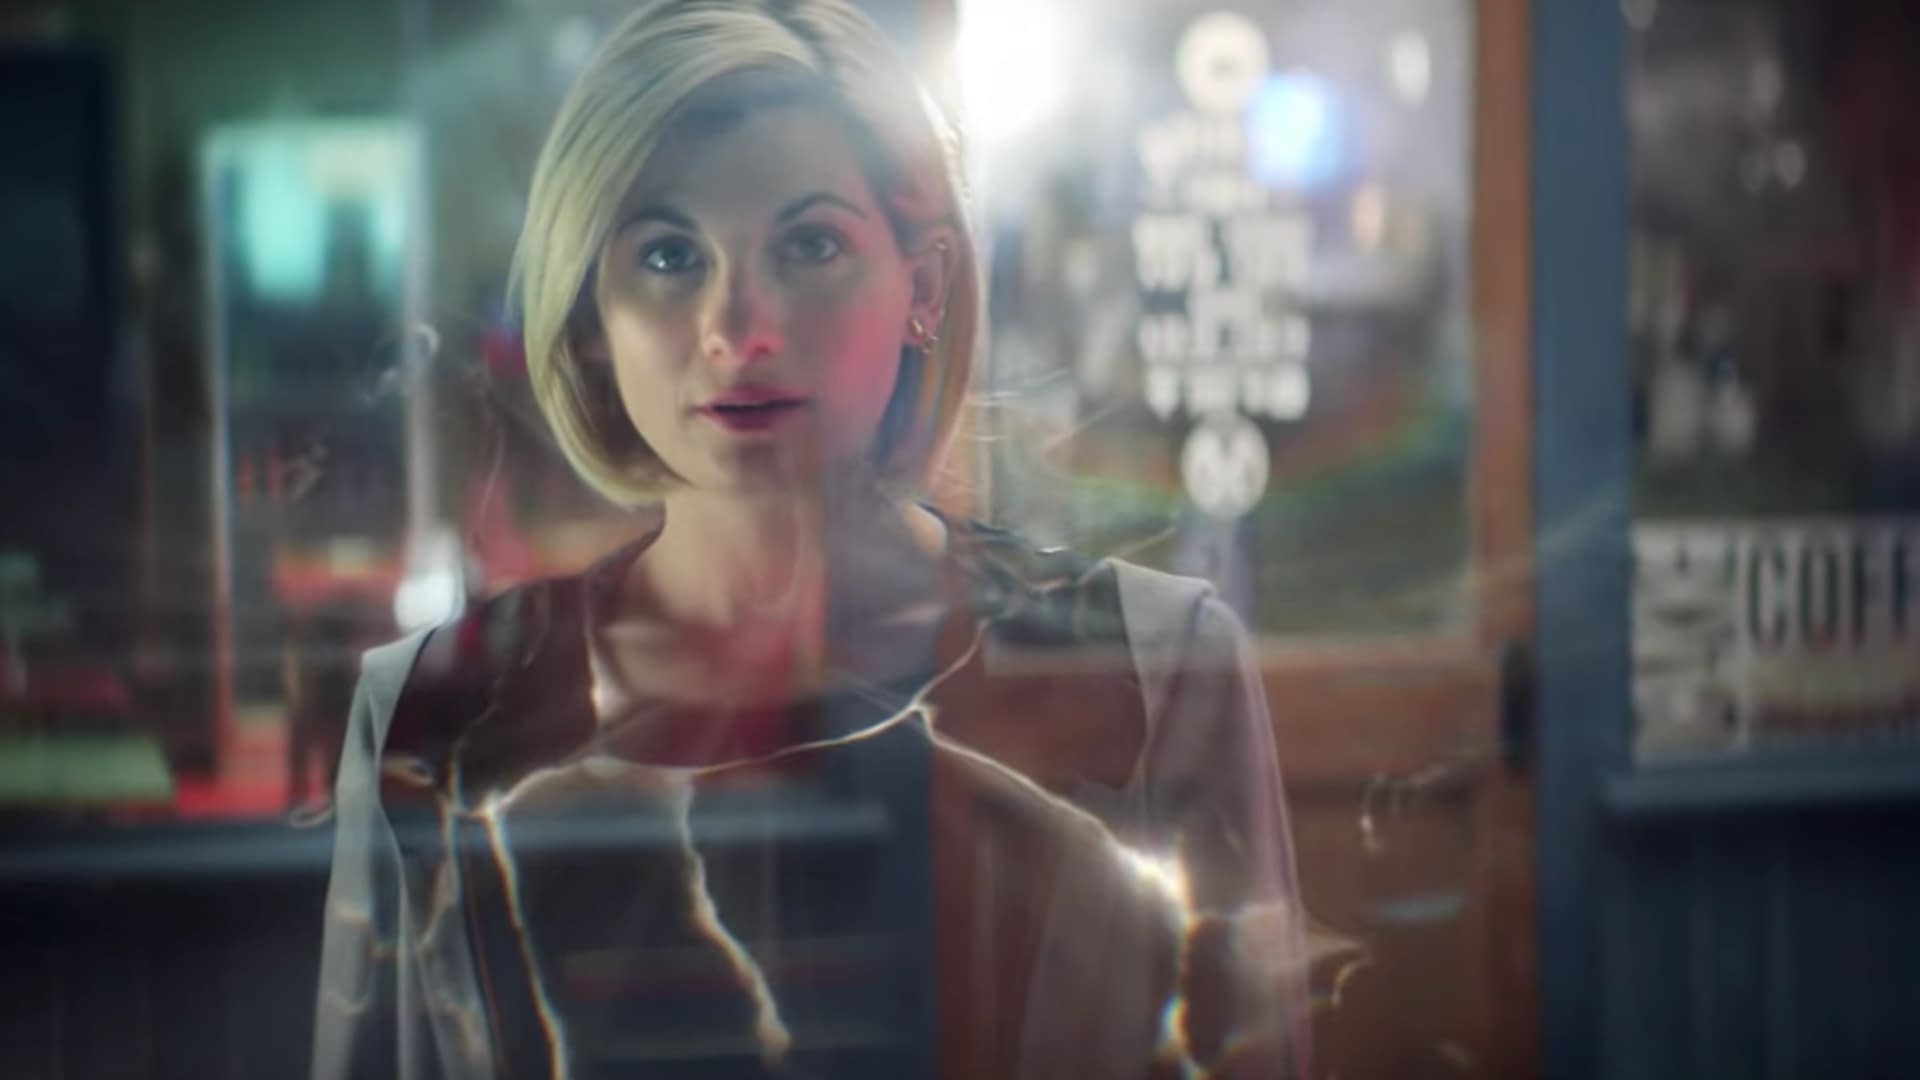 Doctor Who Series 12: Chris Chibnall Kinda, Sorta, In-a-Way Offers Tiny Hints